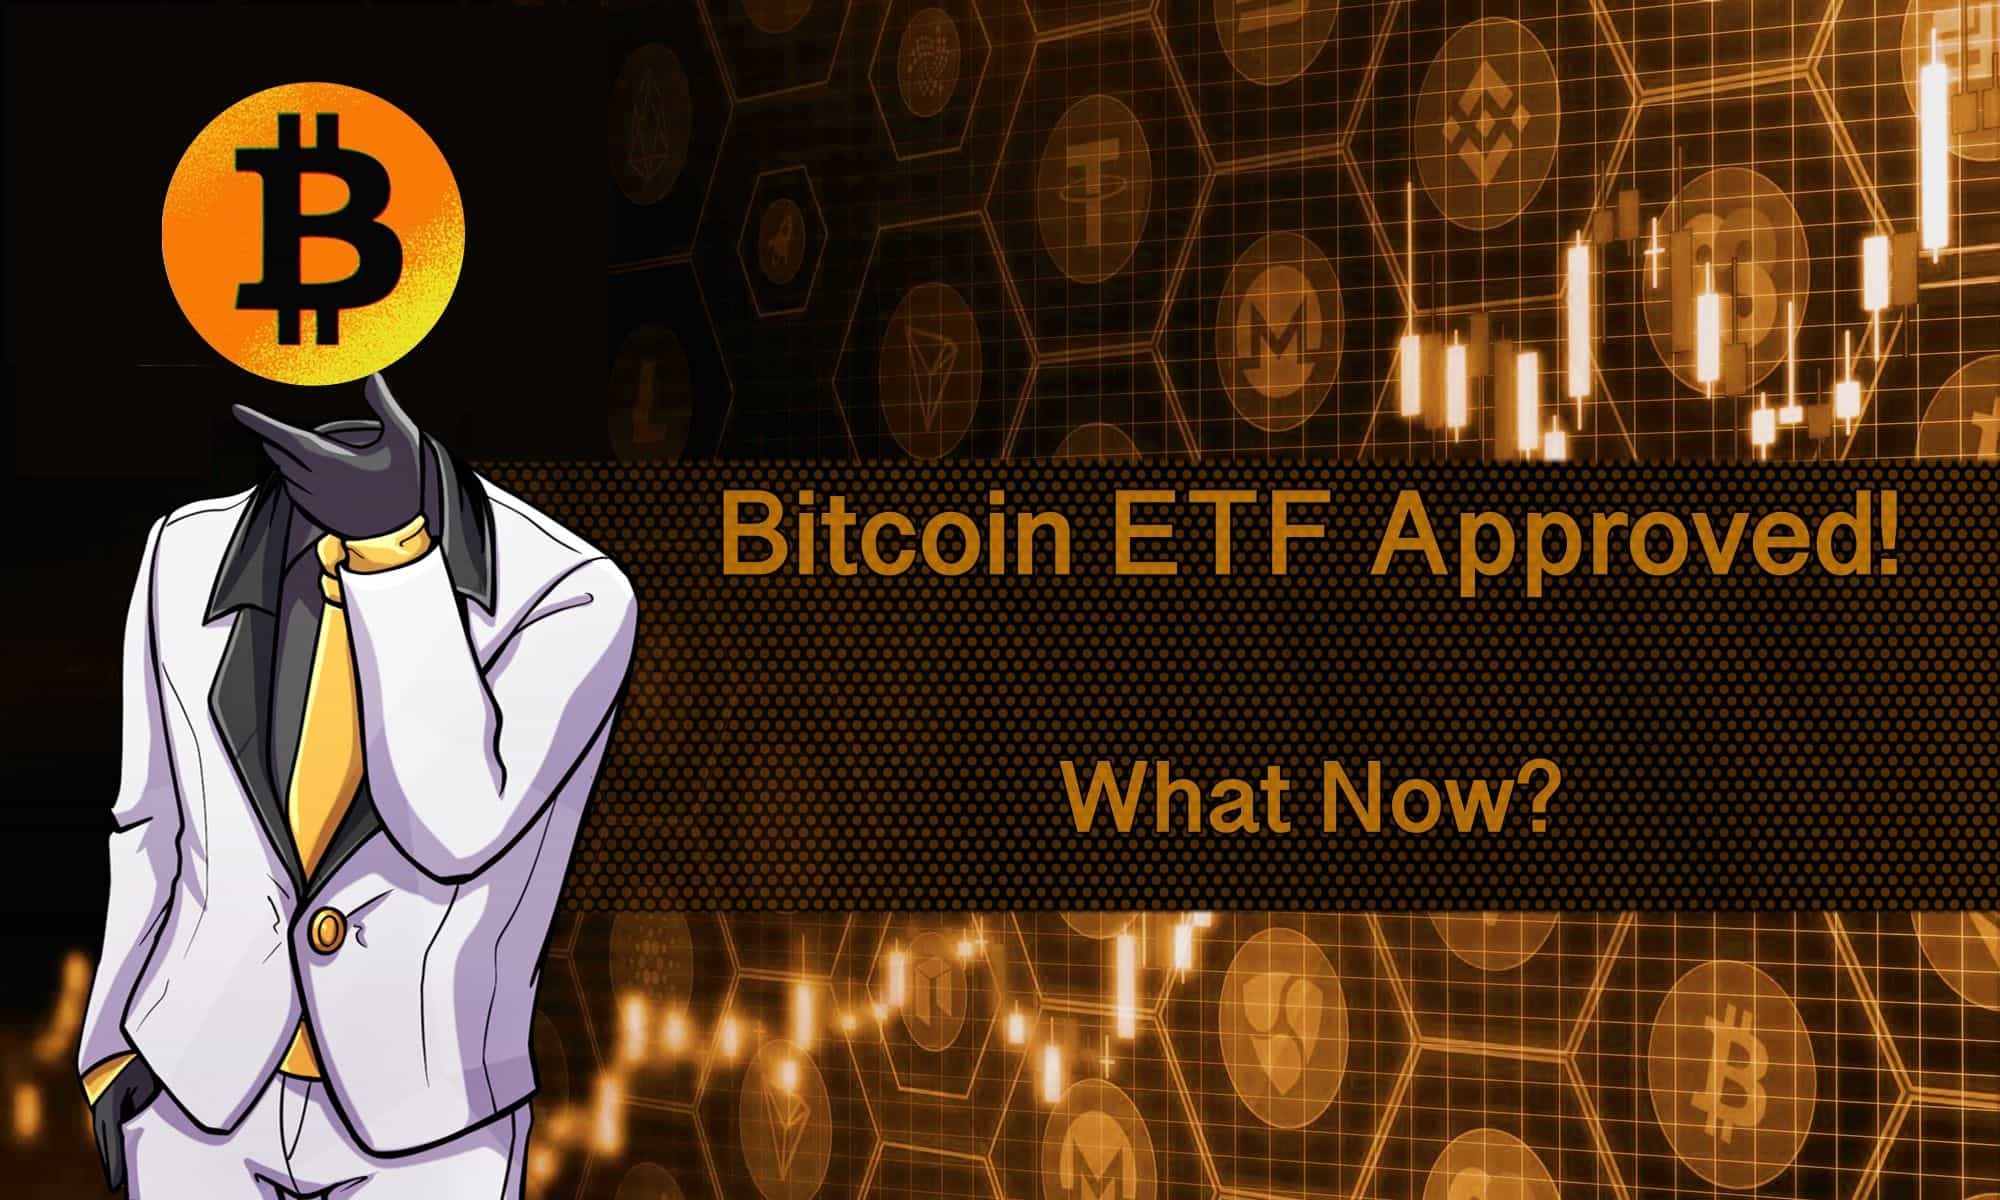 Bitcoin ETF Approved! What Now?